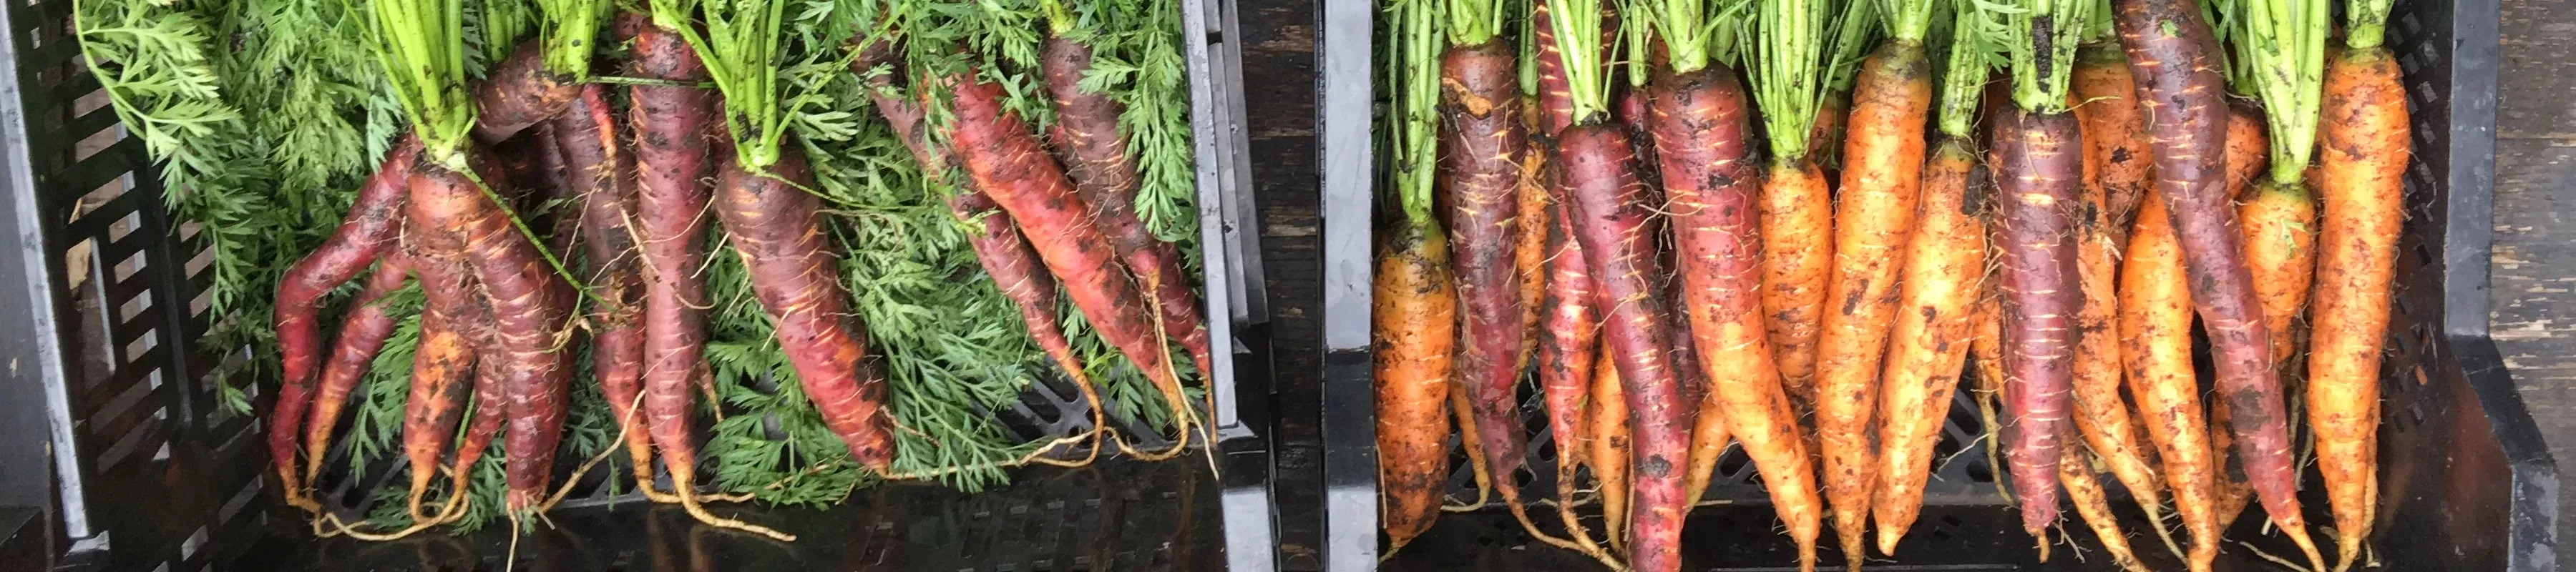 Carrots fresh out of the first